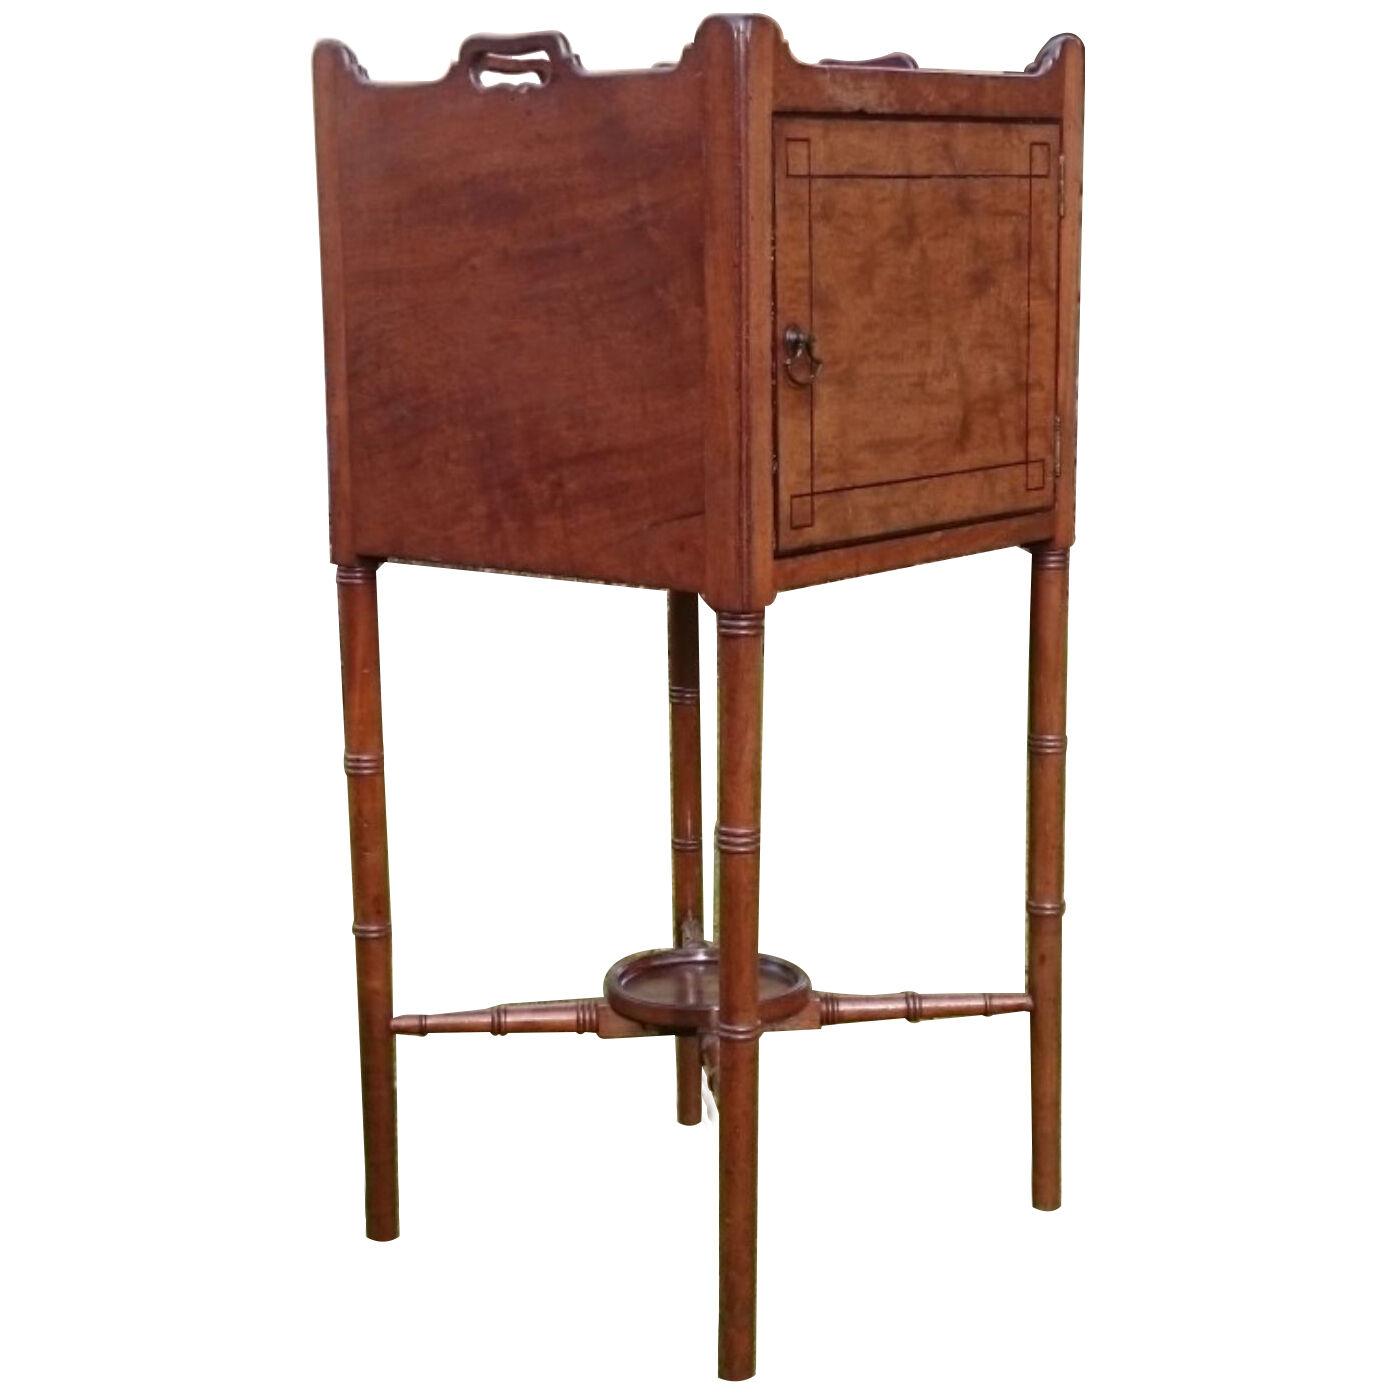 18th Century George III Period Antique Mahogany Bedside Cupboard / Night Stand